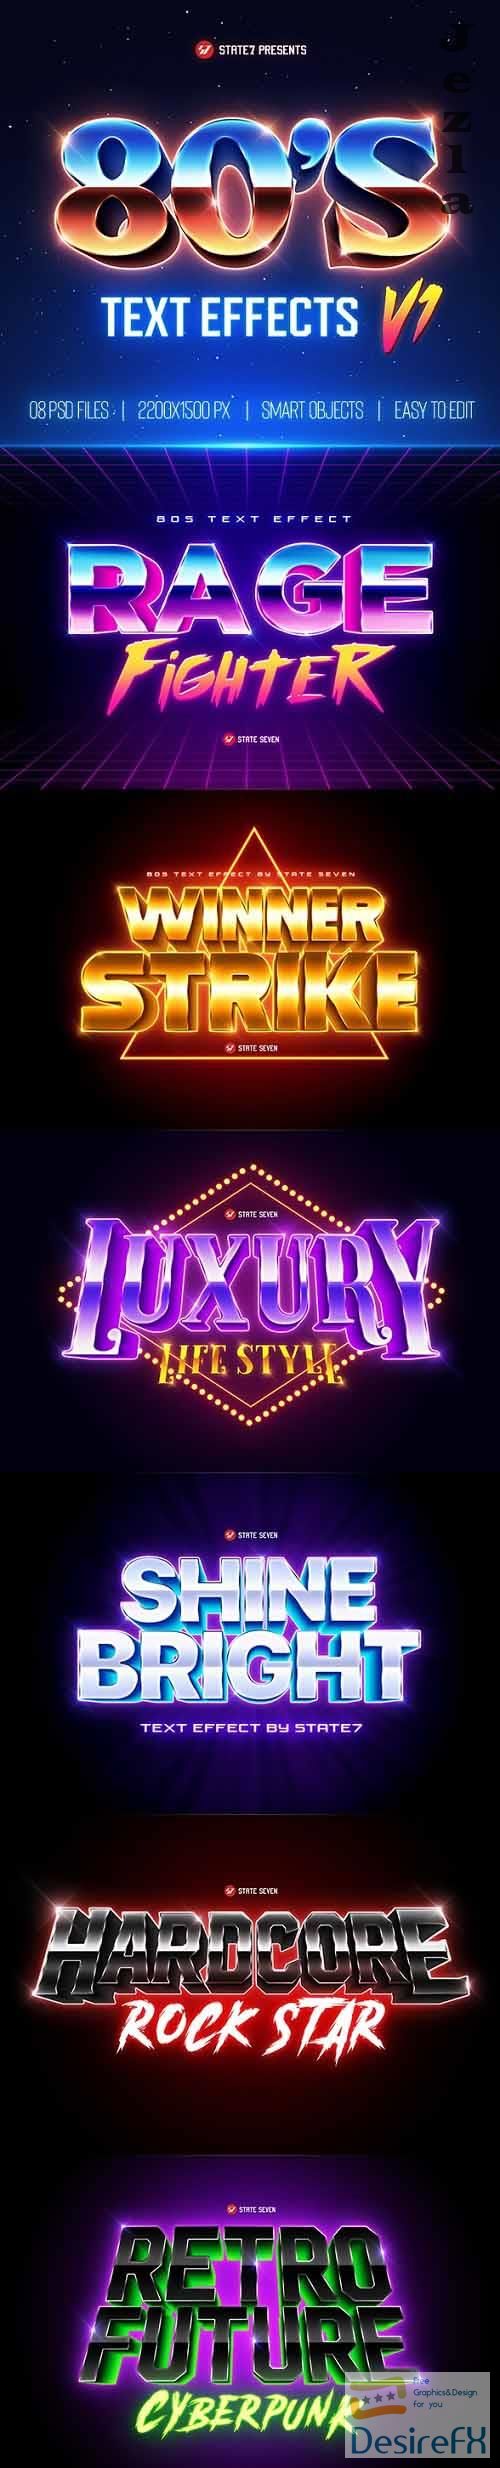 GraphicRiver - 80s Text Effects V1 29259774